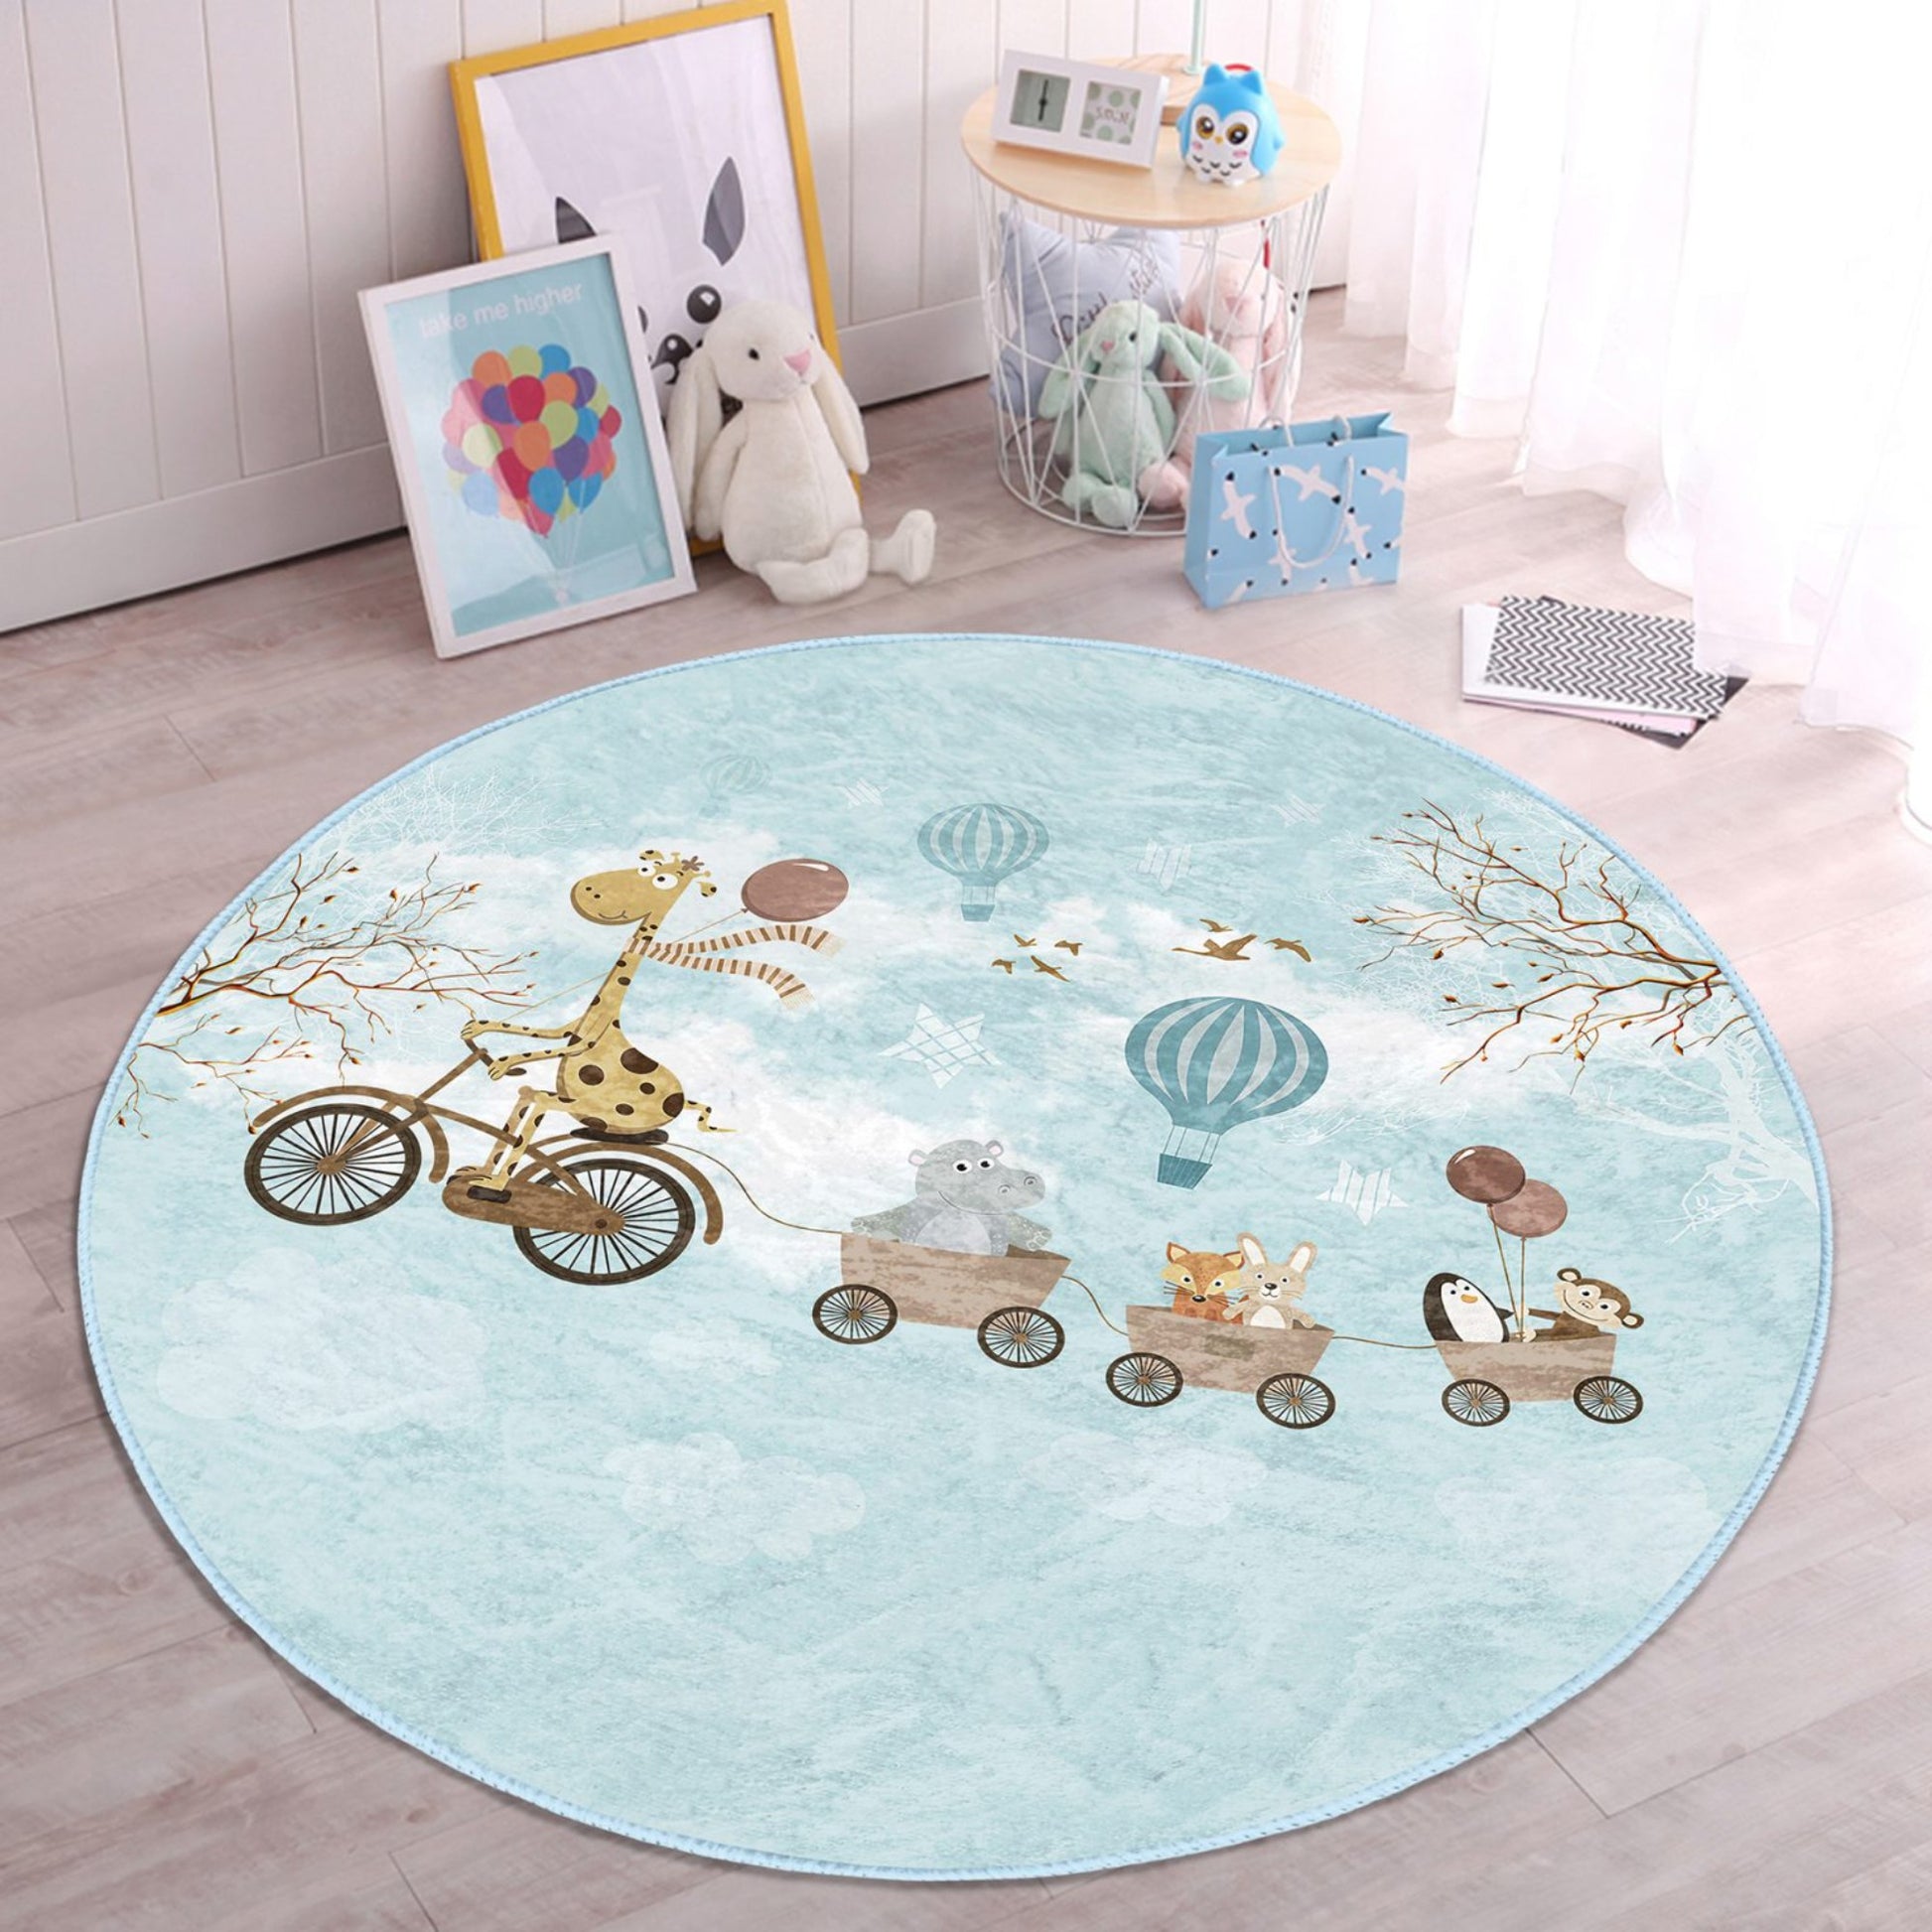 Round Animal Train Patterned Floor Rug - Charming Charm